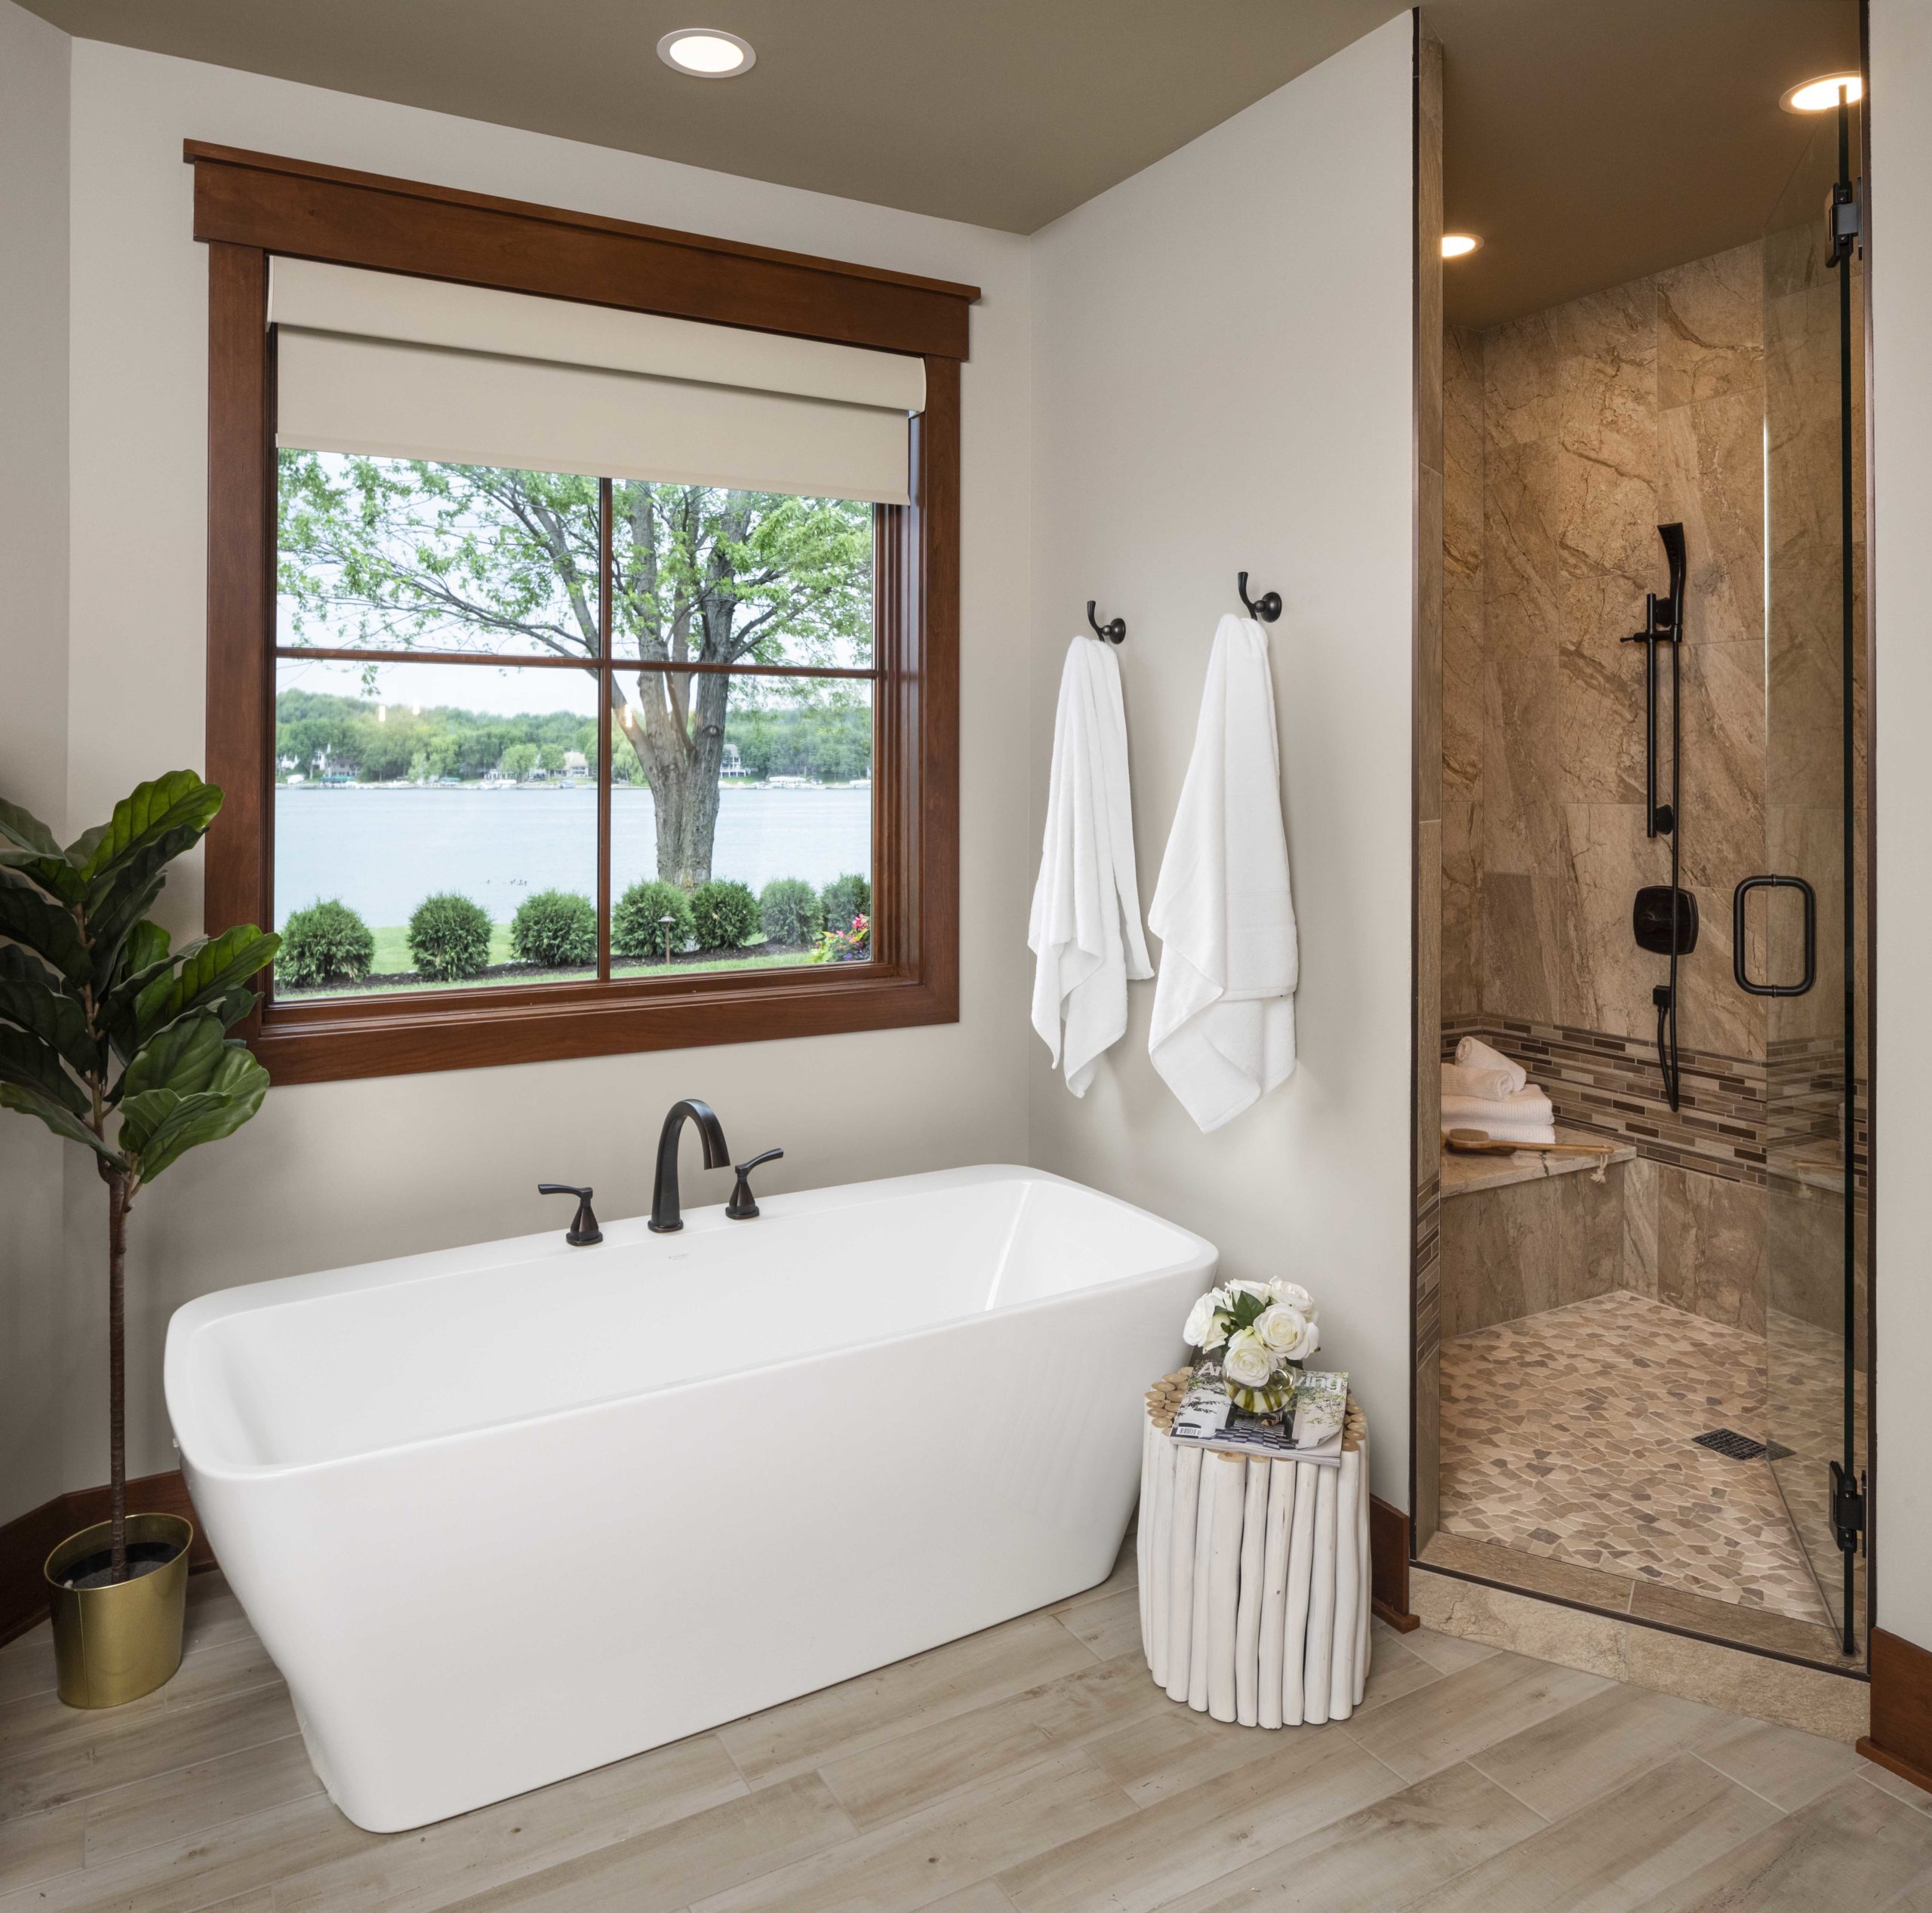 A custom home remodel featuring a bathroom with a large tub and a window.